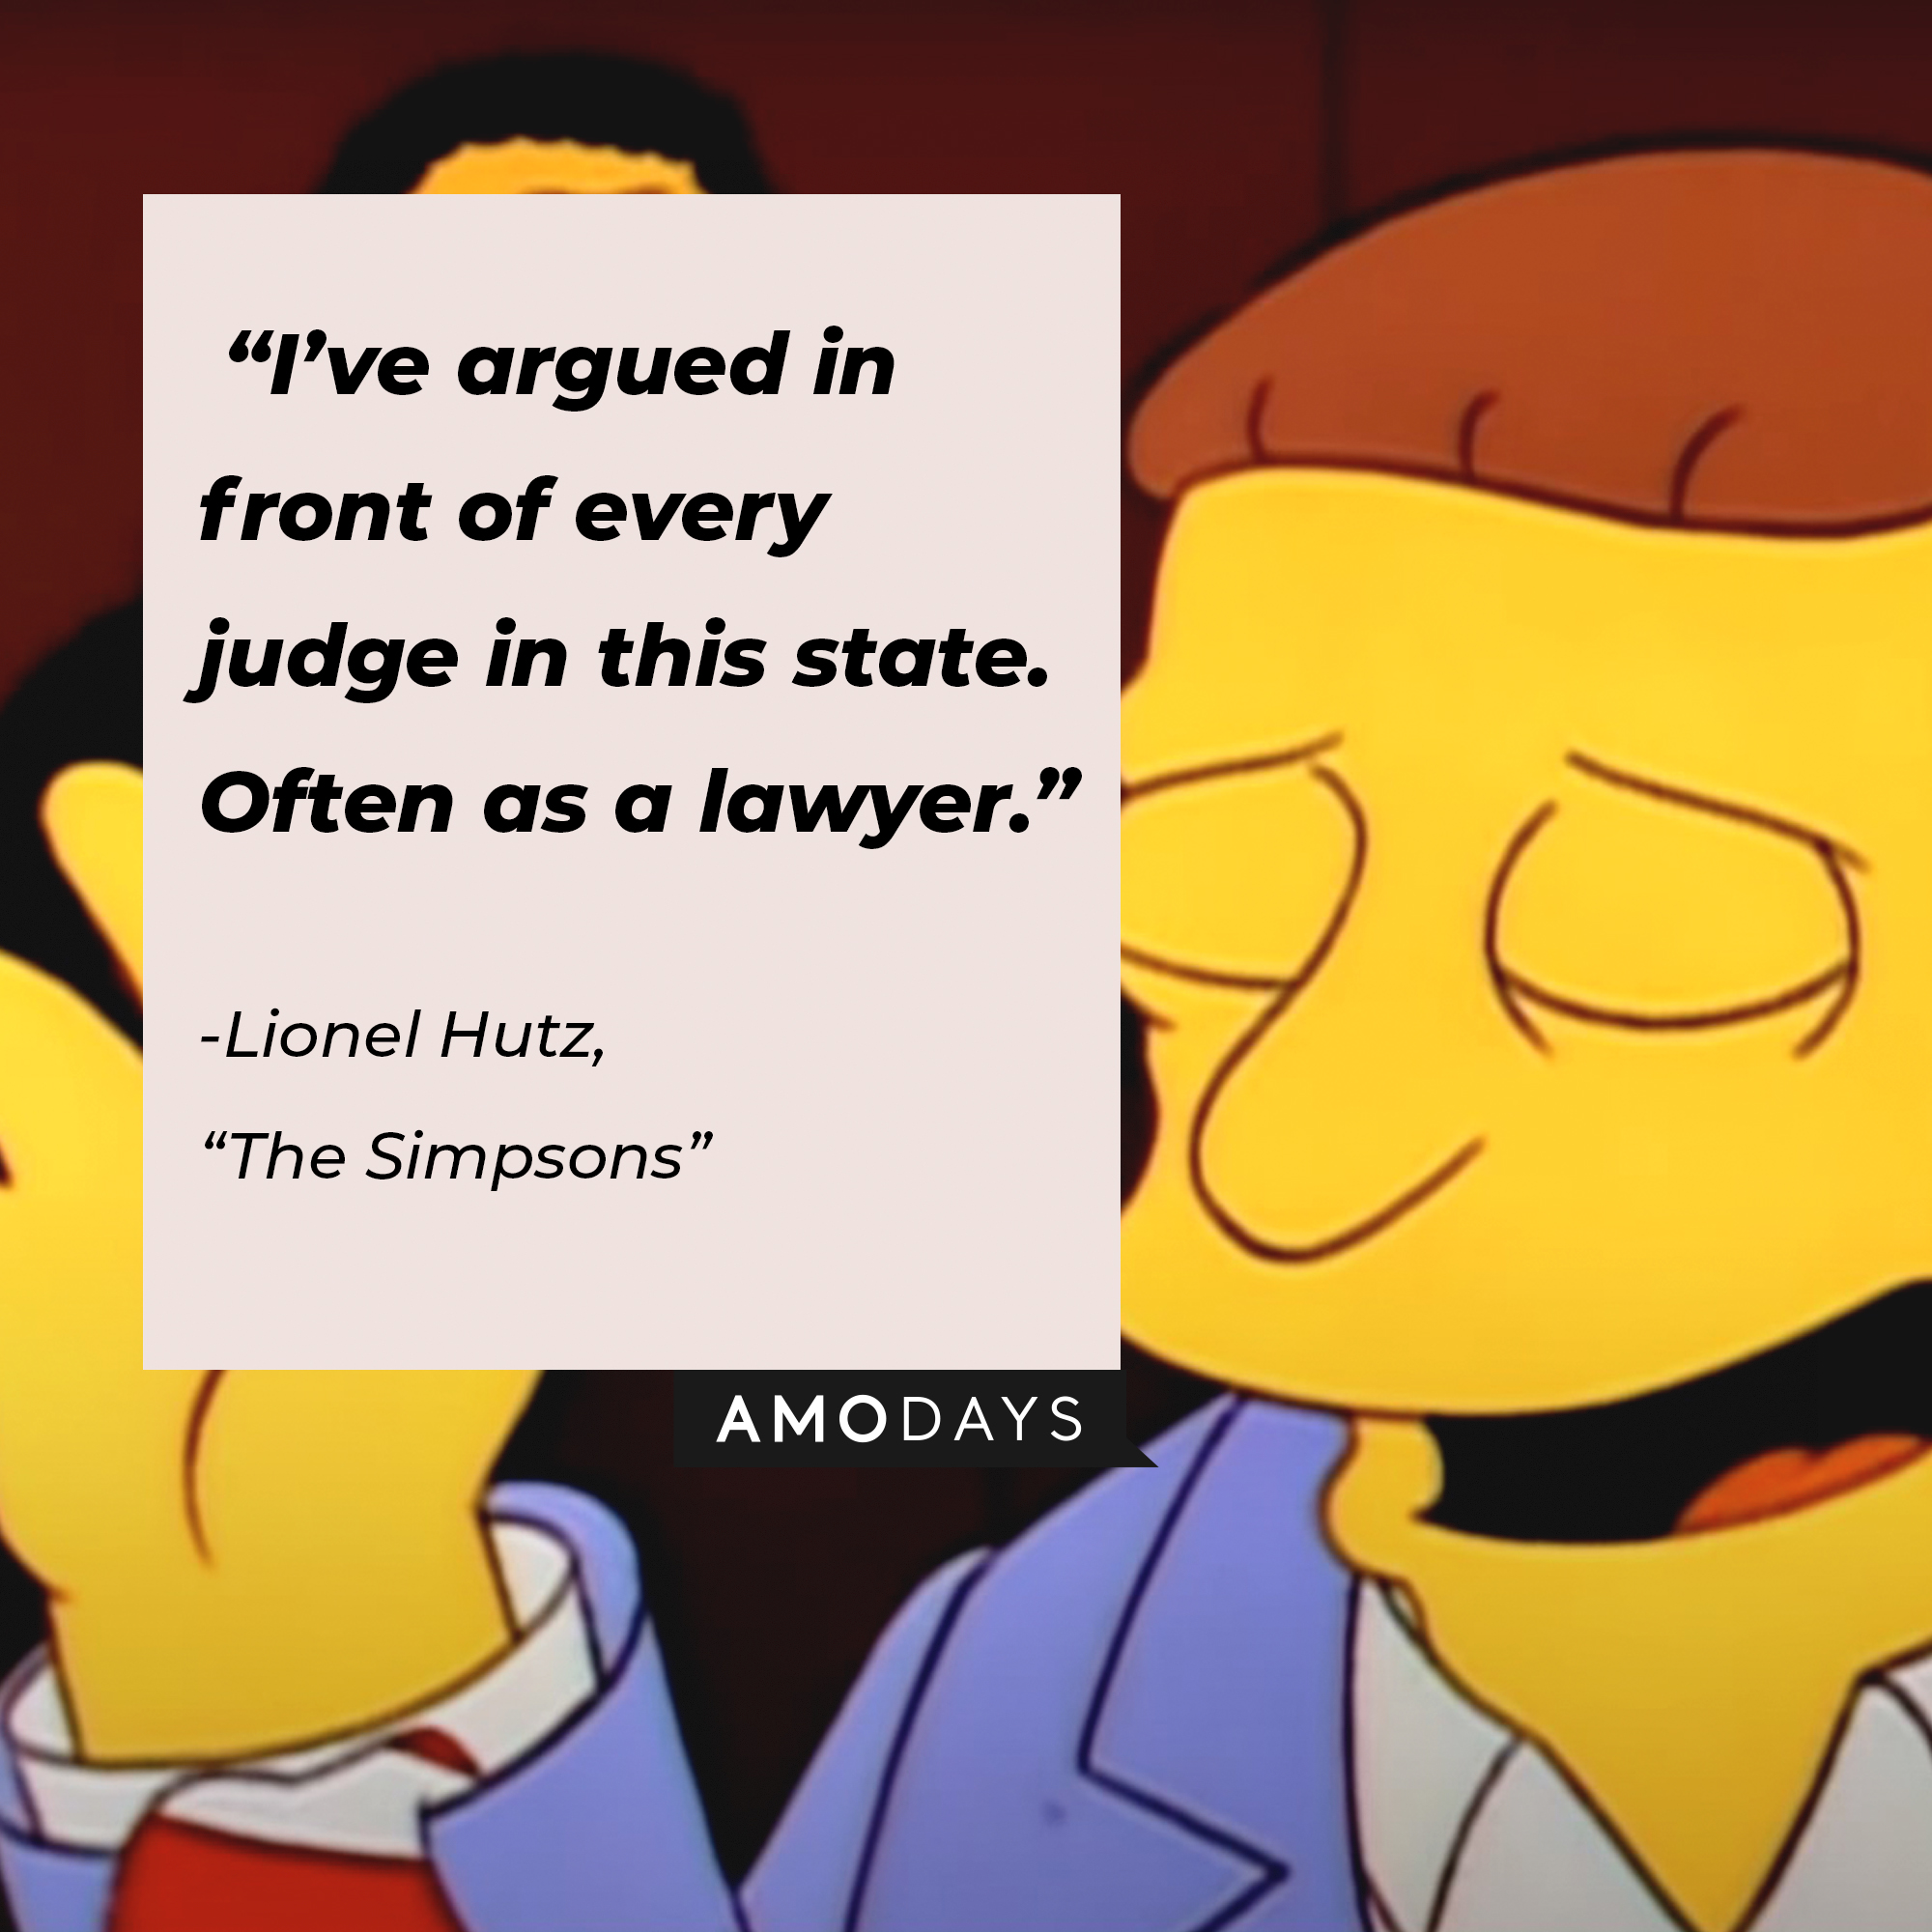 Lionel Hutz’s quote from “The Simpsons”: “I’ve argued in front of every judge in this state. Often as a lawyer.” | Source: facebook.com/TheSimpsons